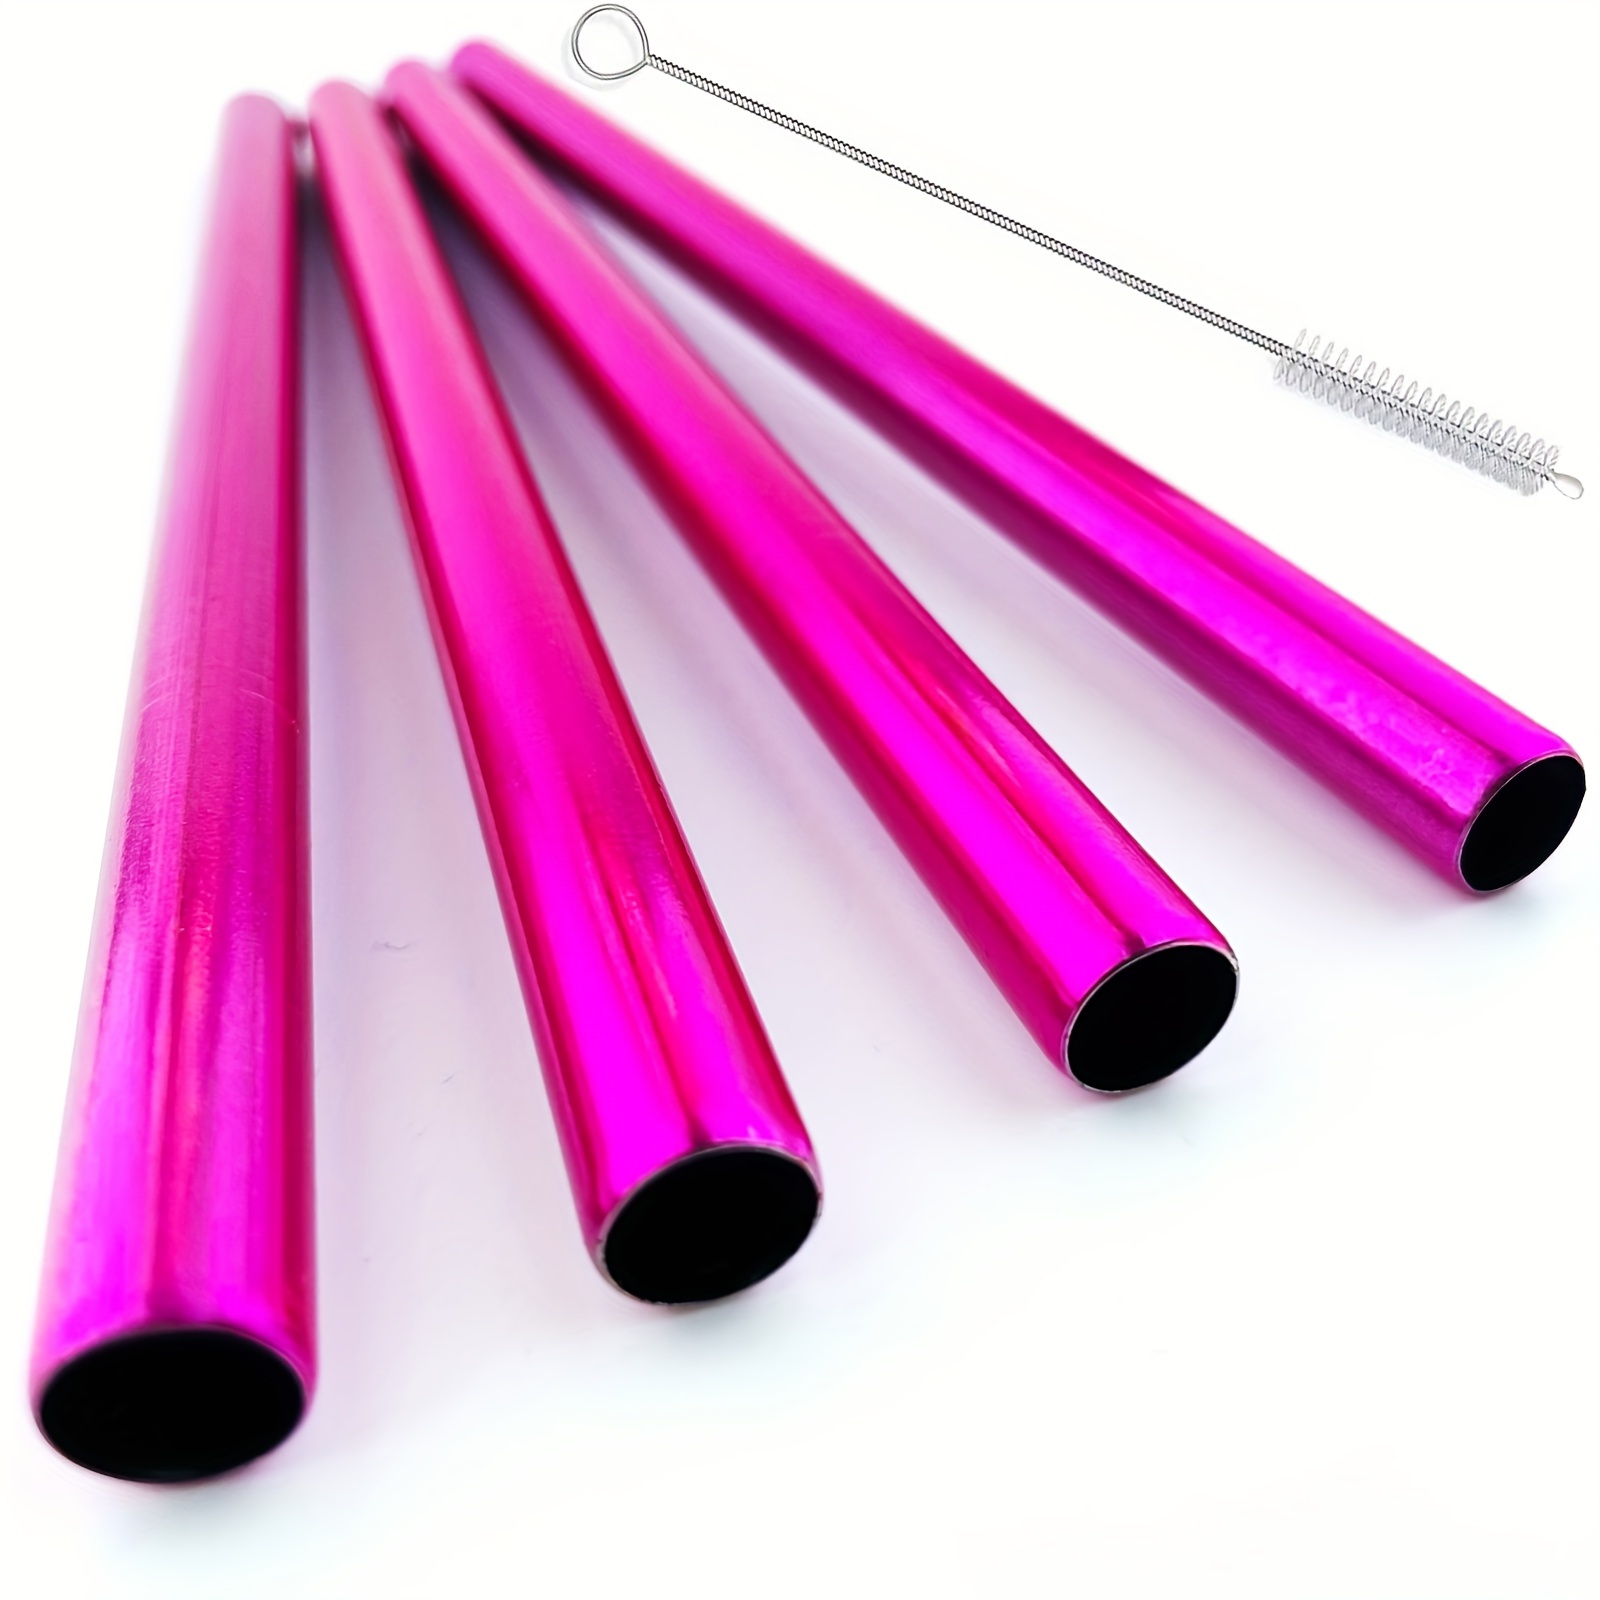 EXTRA WIDE REUSABLE METAL STRAW, JUMBO STAINLESS STEEL BOBA STRAW